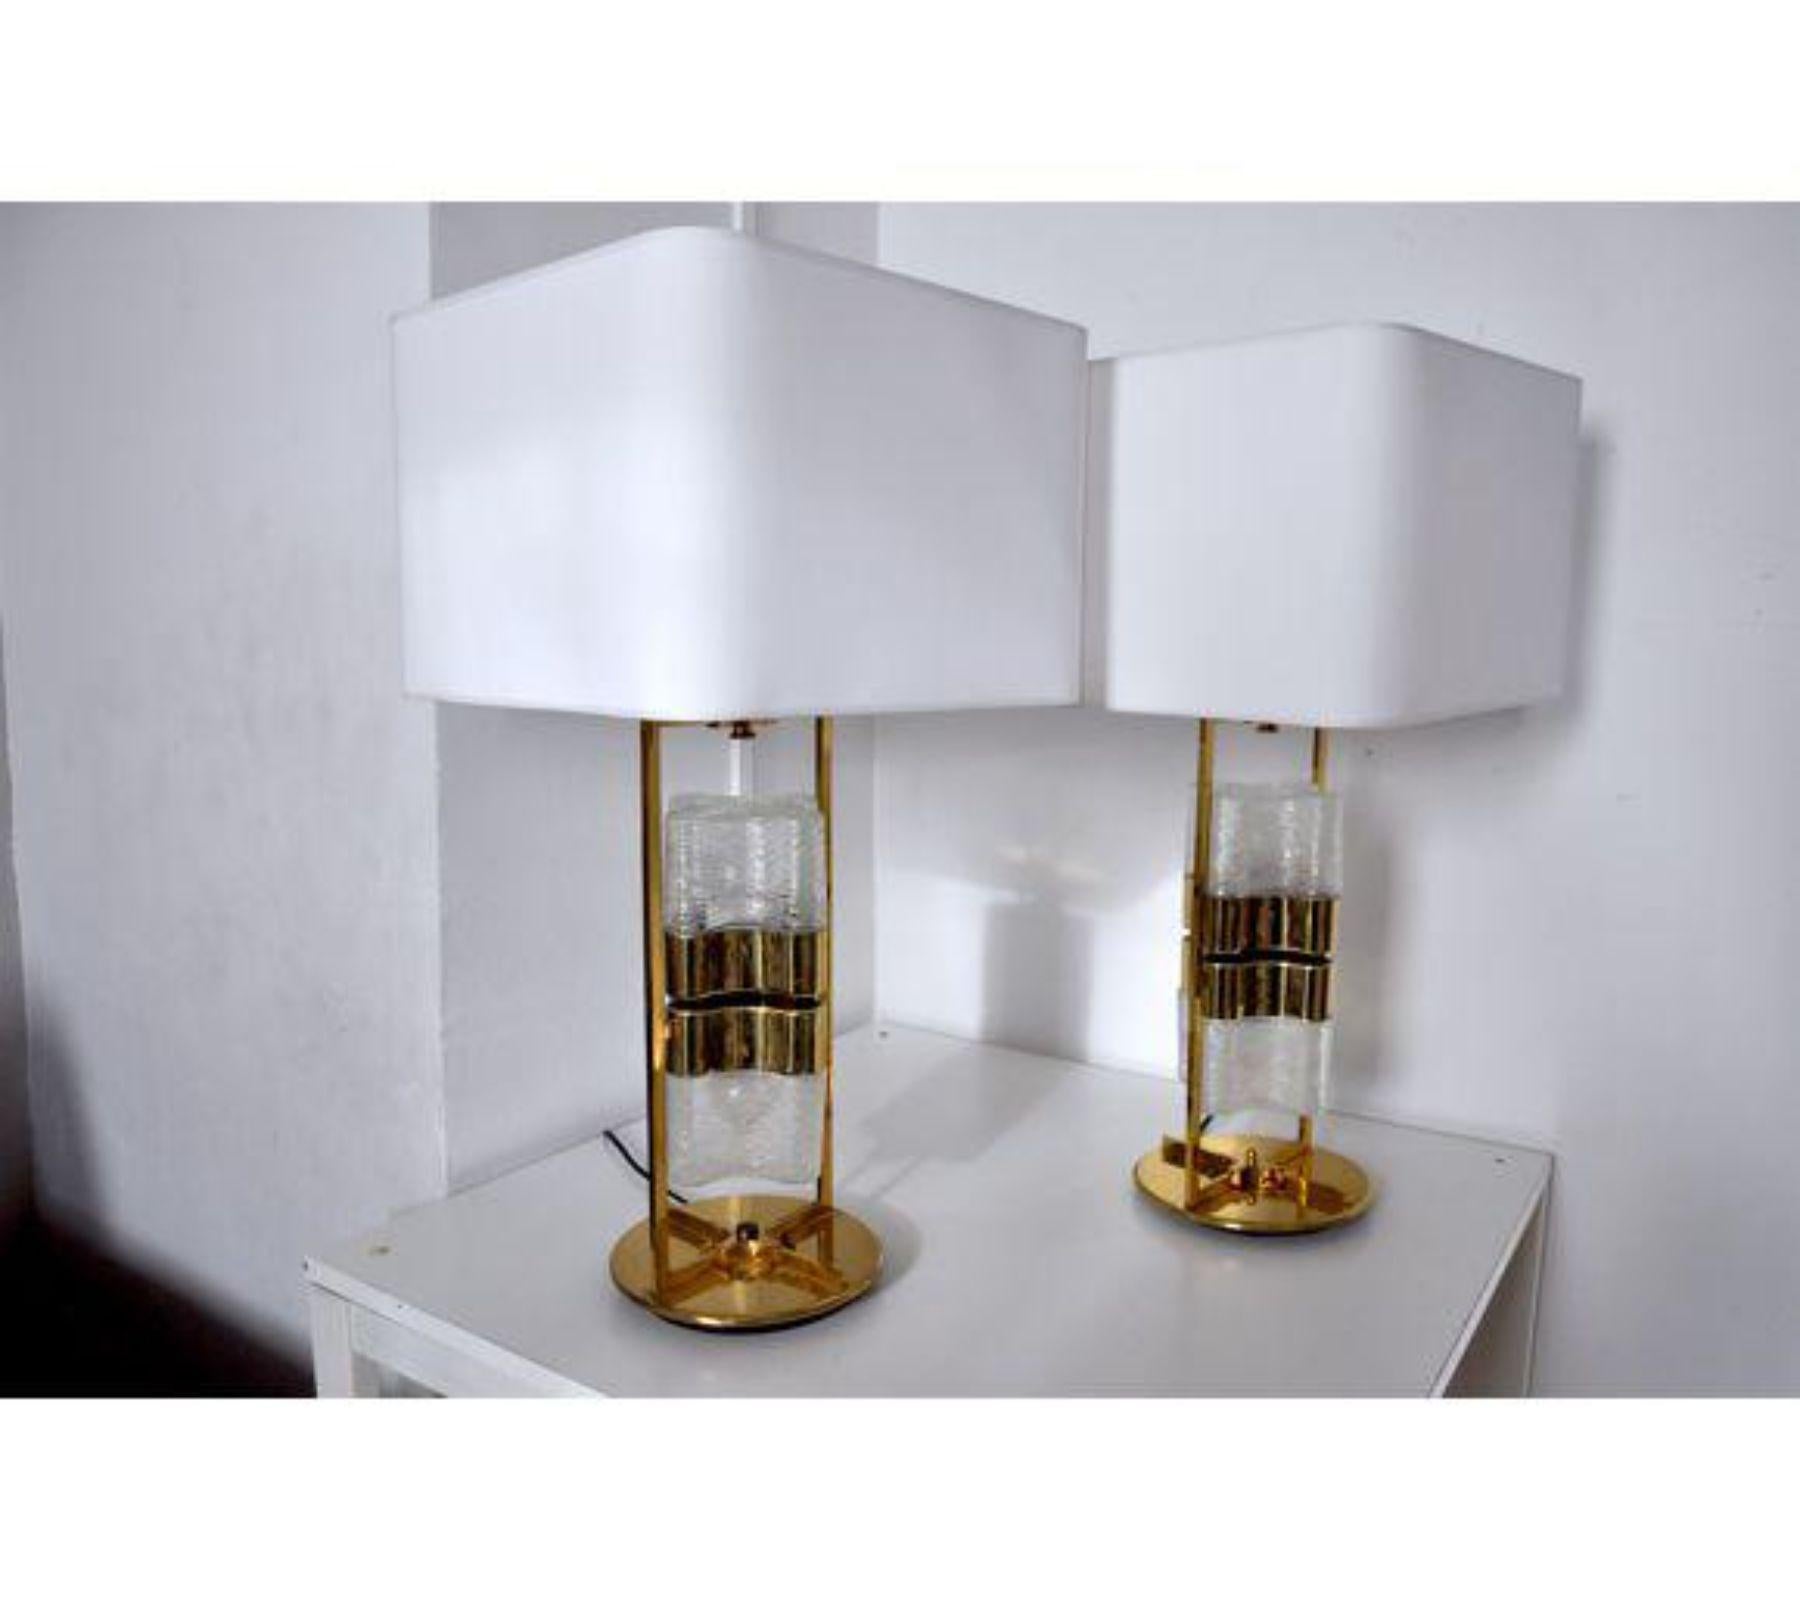 Late 20th Century 1970 Gateano Sciolari Table Lamps, Italy - a Pair For Sale